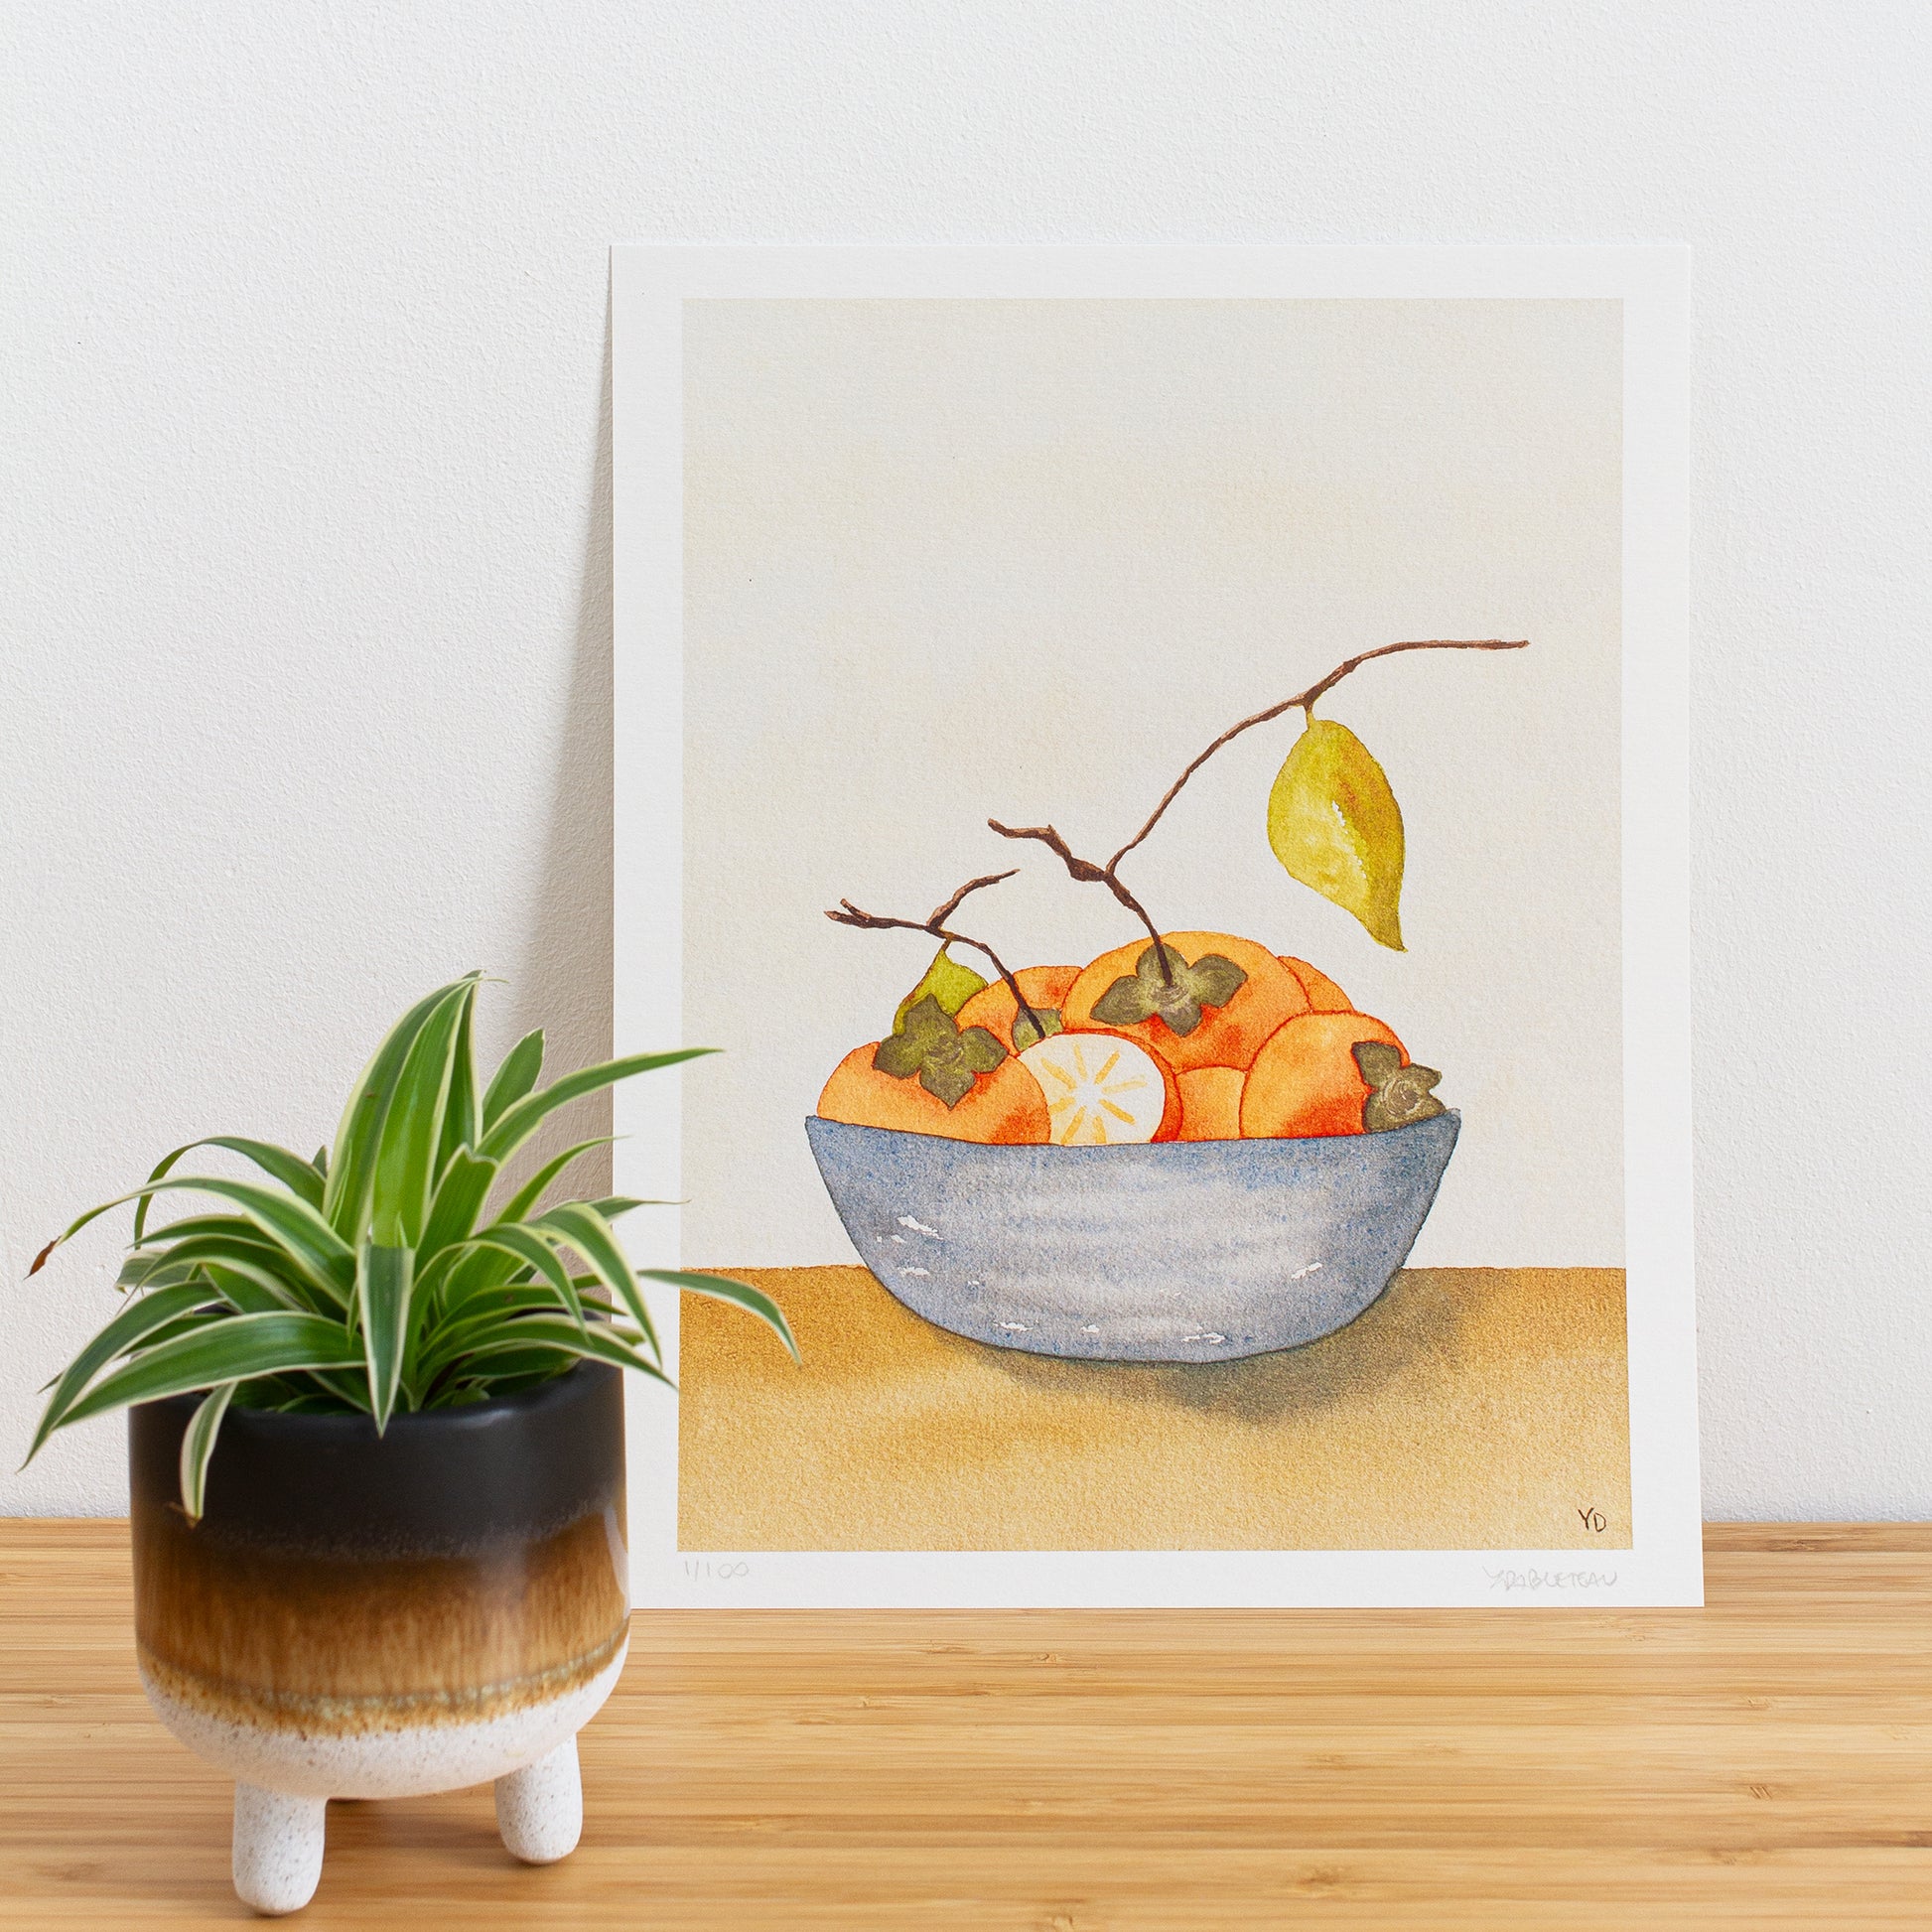 Image is a photo of a Limited edition art print sitting on bamboo wood surface with white background. The print is a reproduction from a handmade watercolour painting representing persimmon fruits with branches and leaves in a blue grey bowl.